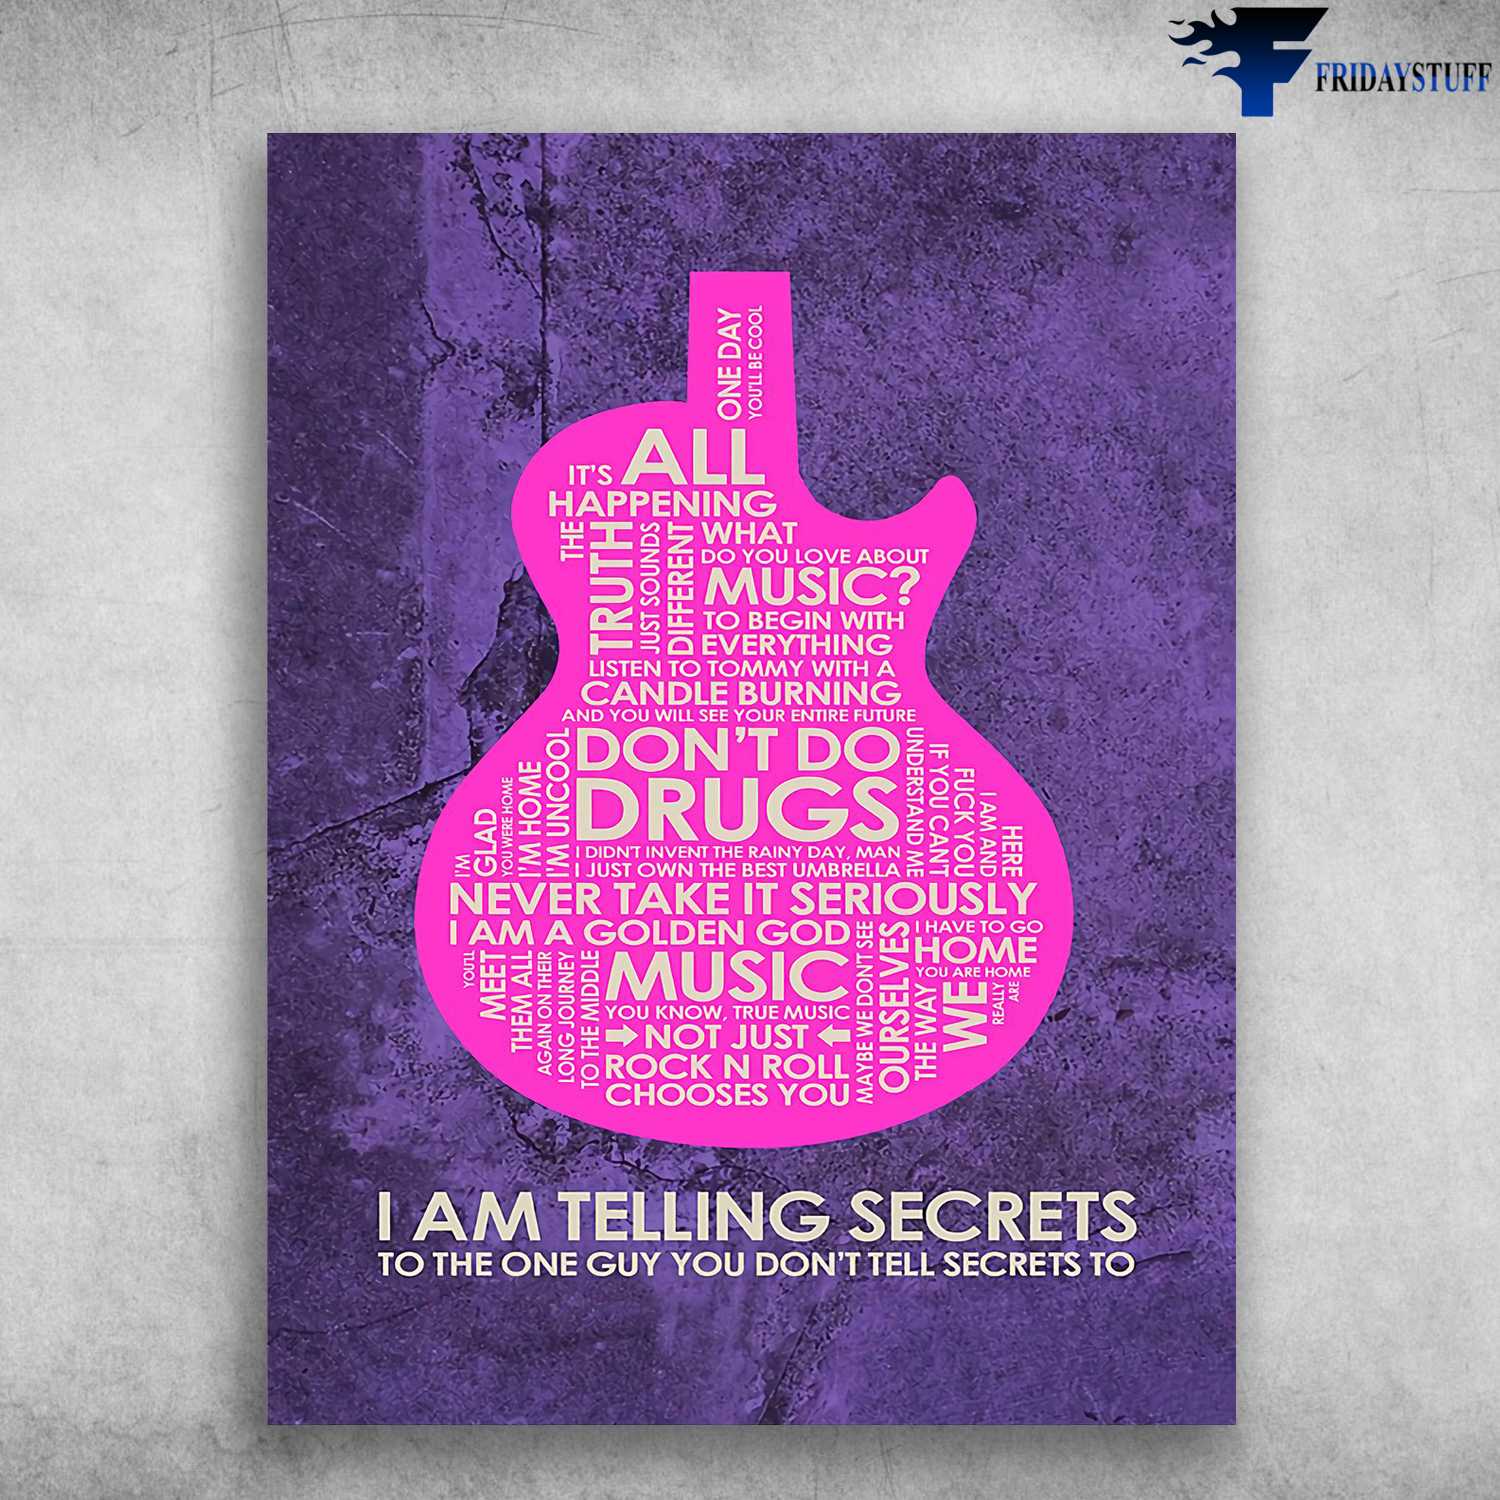 Guitar Poster, One Day You Be Cool, It's All Happening, The Truth Just Sounds Different, What Do You Love About Music, I Am Telling Secrets, To The One Guy You Don't Tell Secrets To